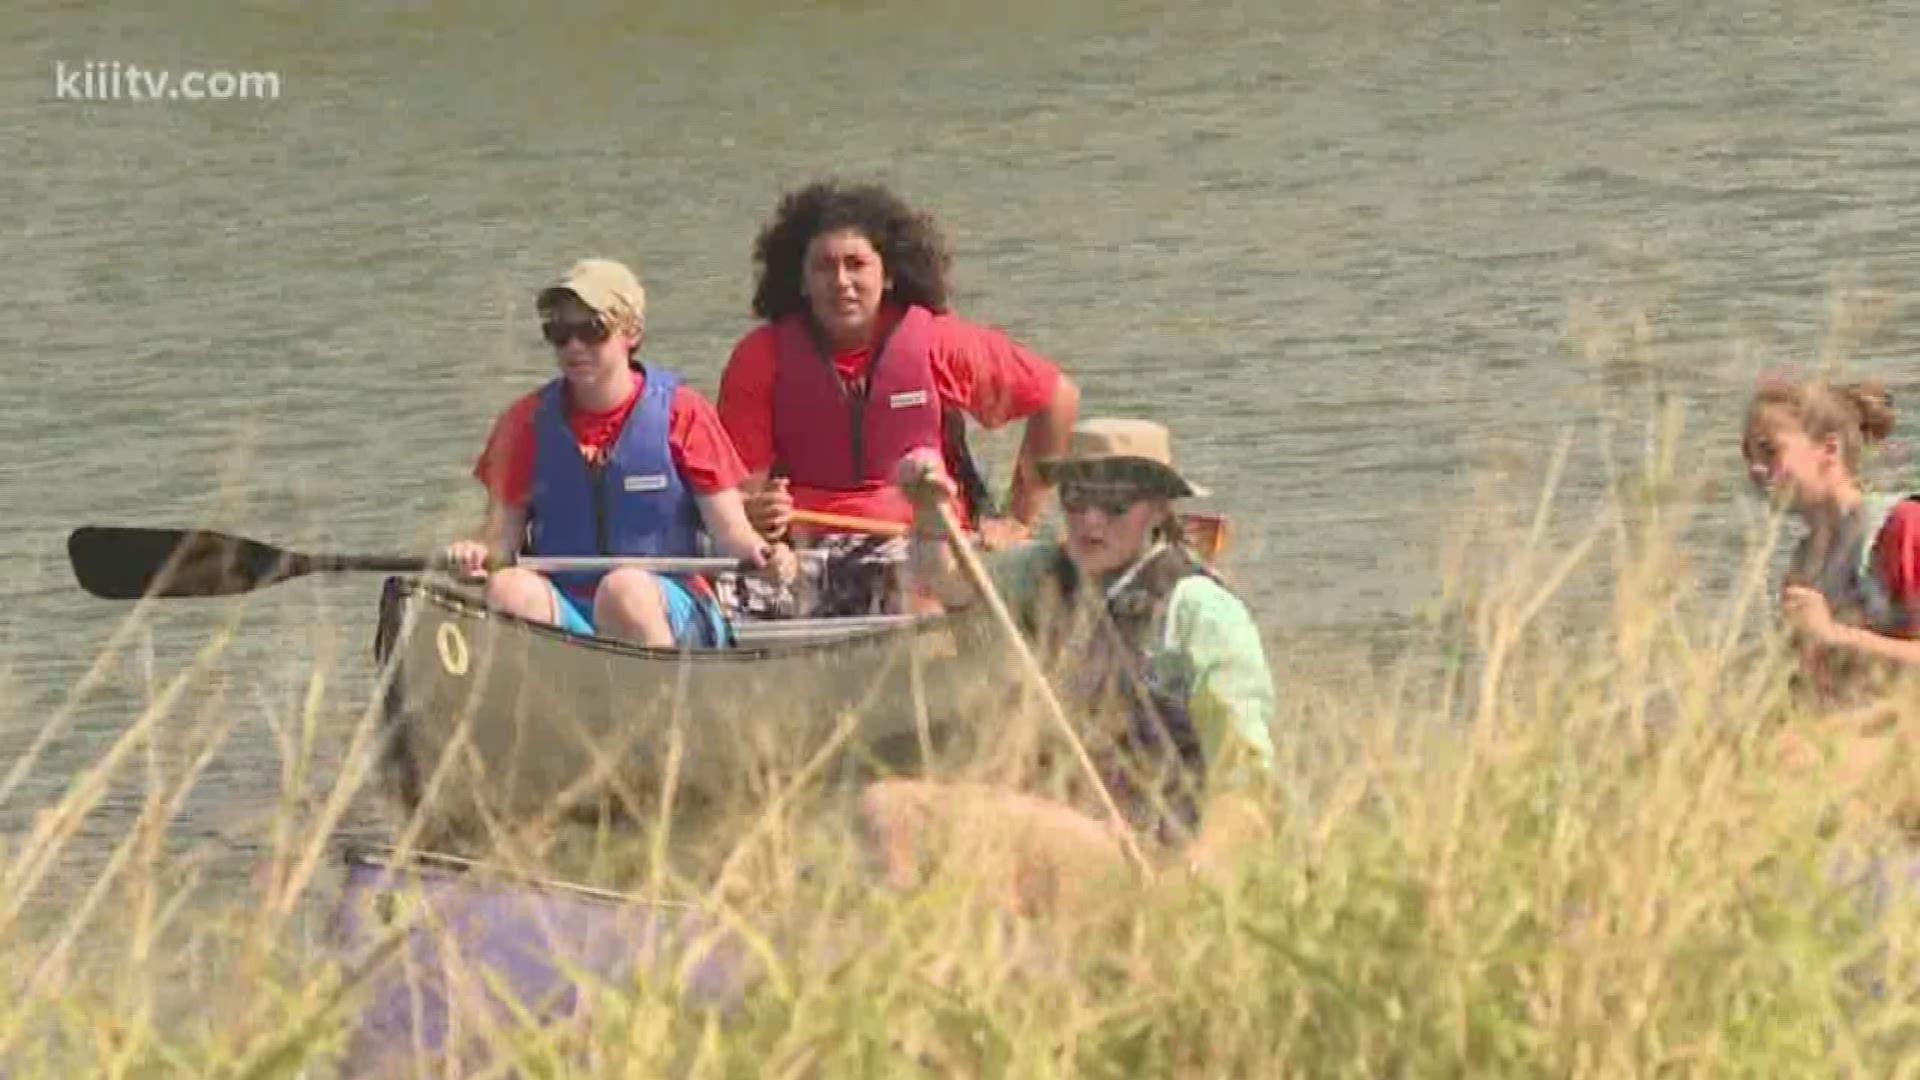 Kiii's parent company donated $5,000 to the non-profit that uses adventure to teach at-risk kids life-long lessons.